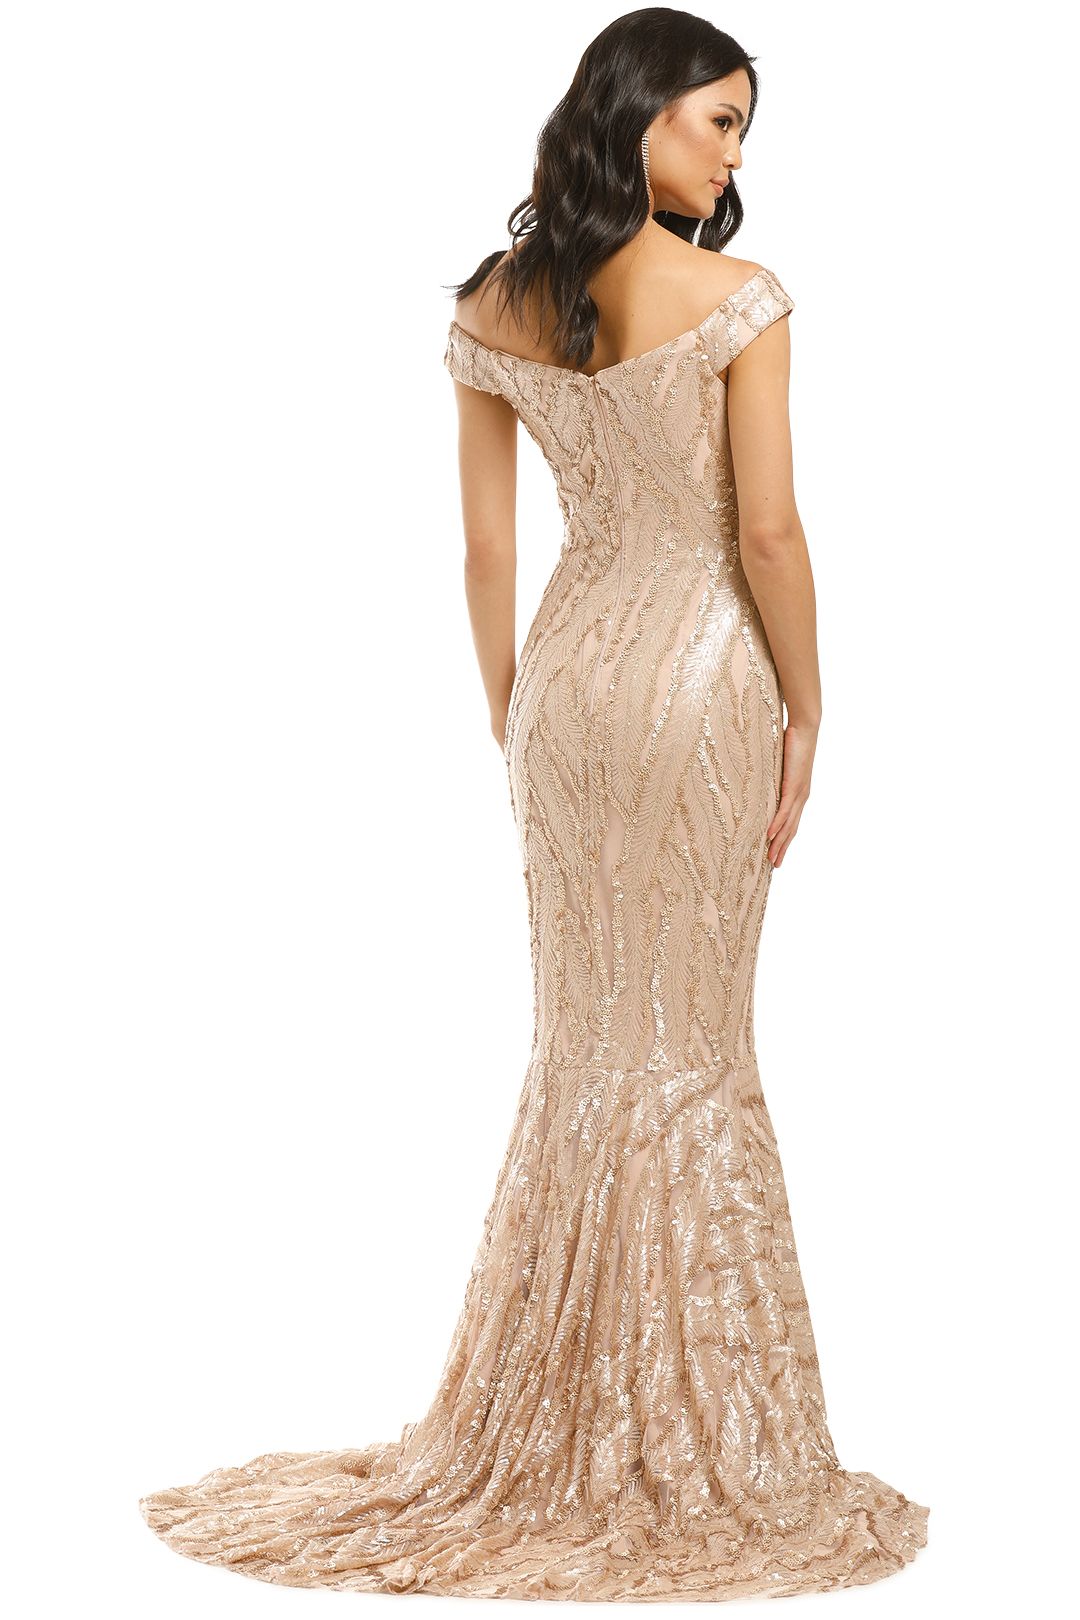 Jadore-Kayley-Gown-Champagne-Back